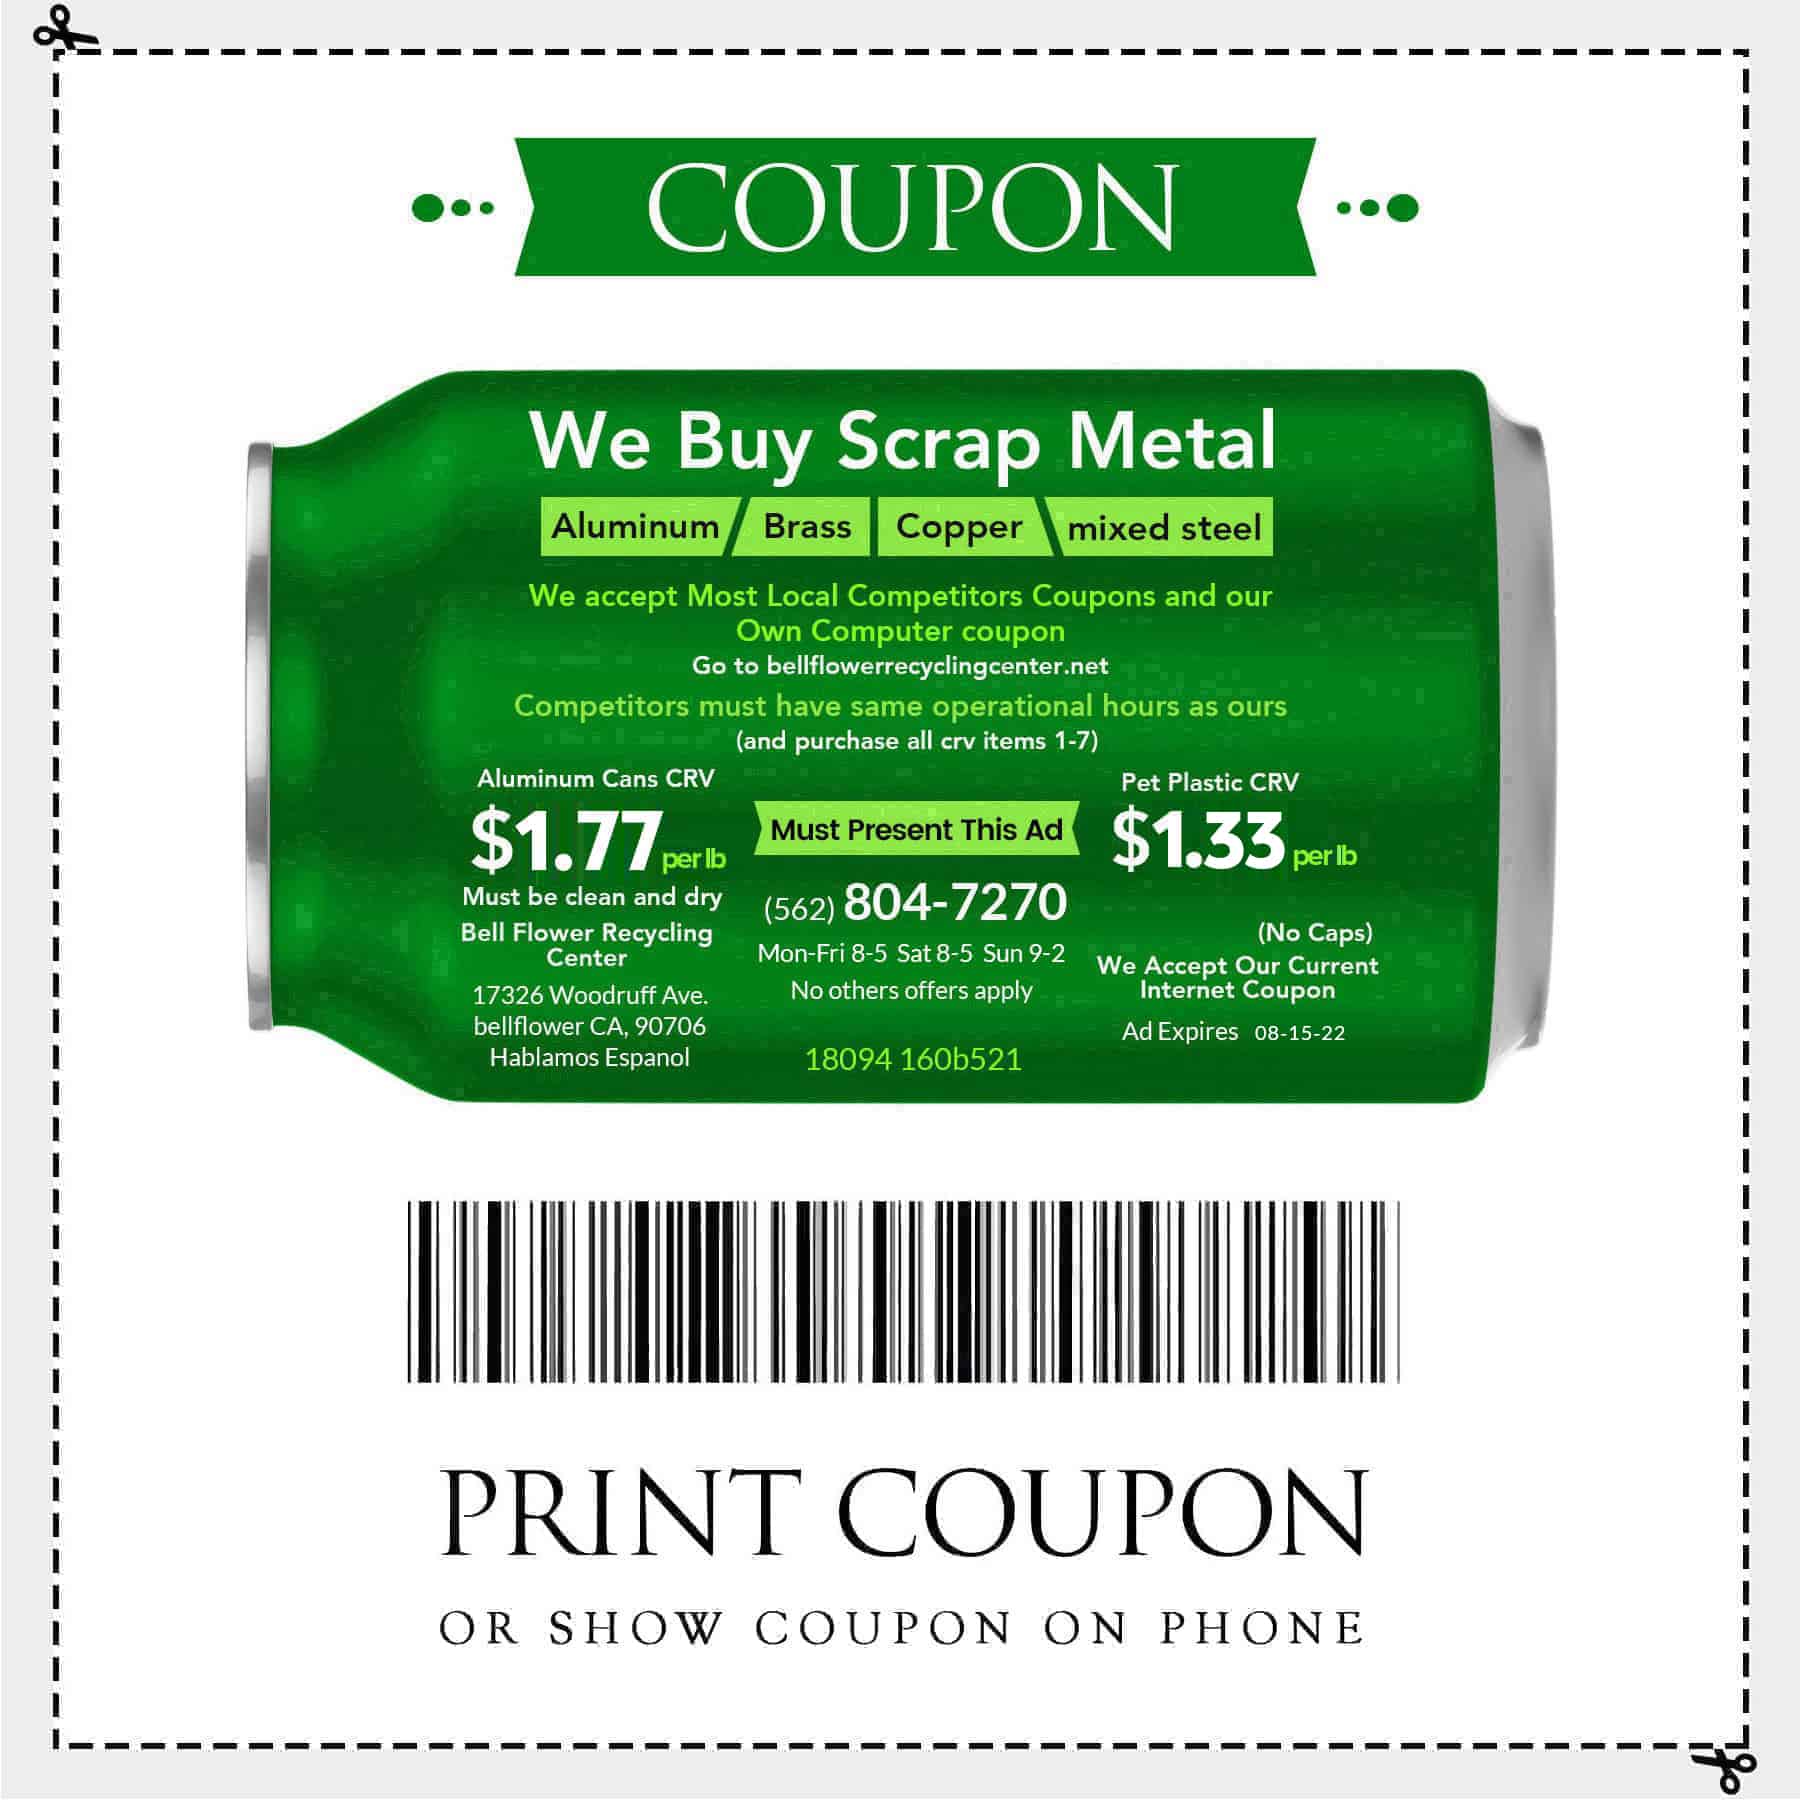 We buy scrap metal Aluminum, Brass, Copper, Mixed steel. We accept most local competitors coupons and our own computer coupon. Competitors must have same operational hours as ours (and purchase all crv items 1-7). One Must present this add. Aluminum Cans CRV $1.77 per lb and Pet Plastic CRV $1.33 per lb.